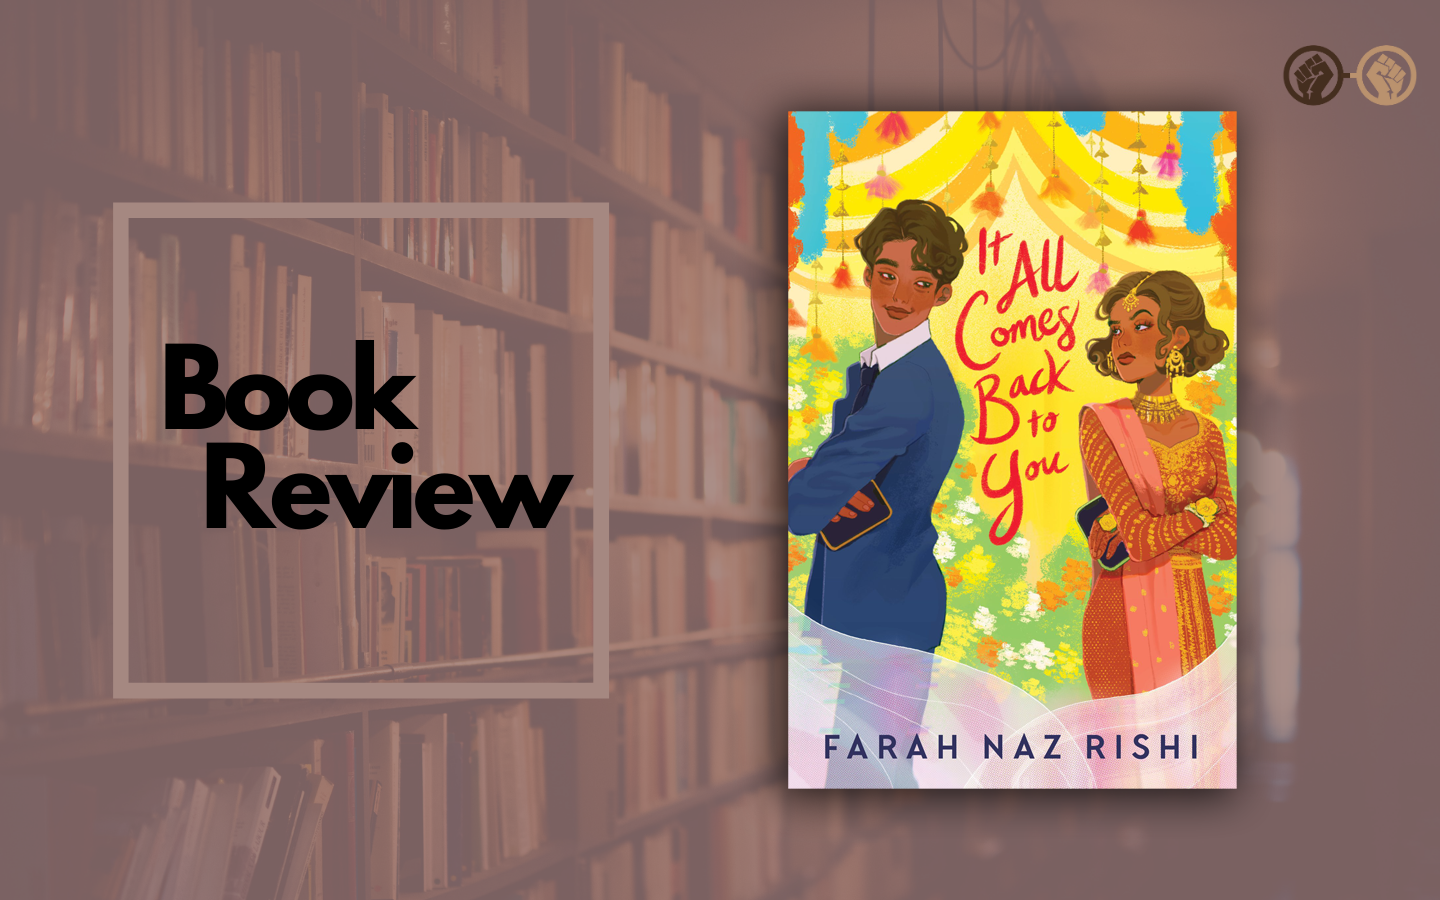 Farah Naz Rishi’s ‘It All Comes Back to You’ Is A Story That Will Resonate With Many – Book Review